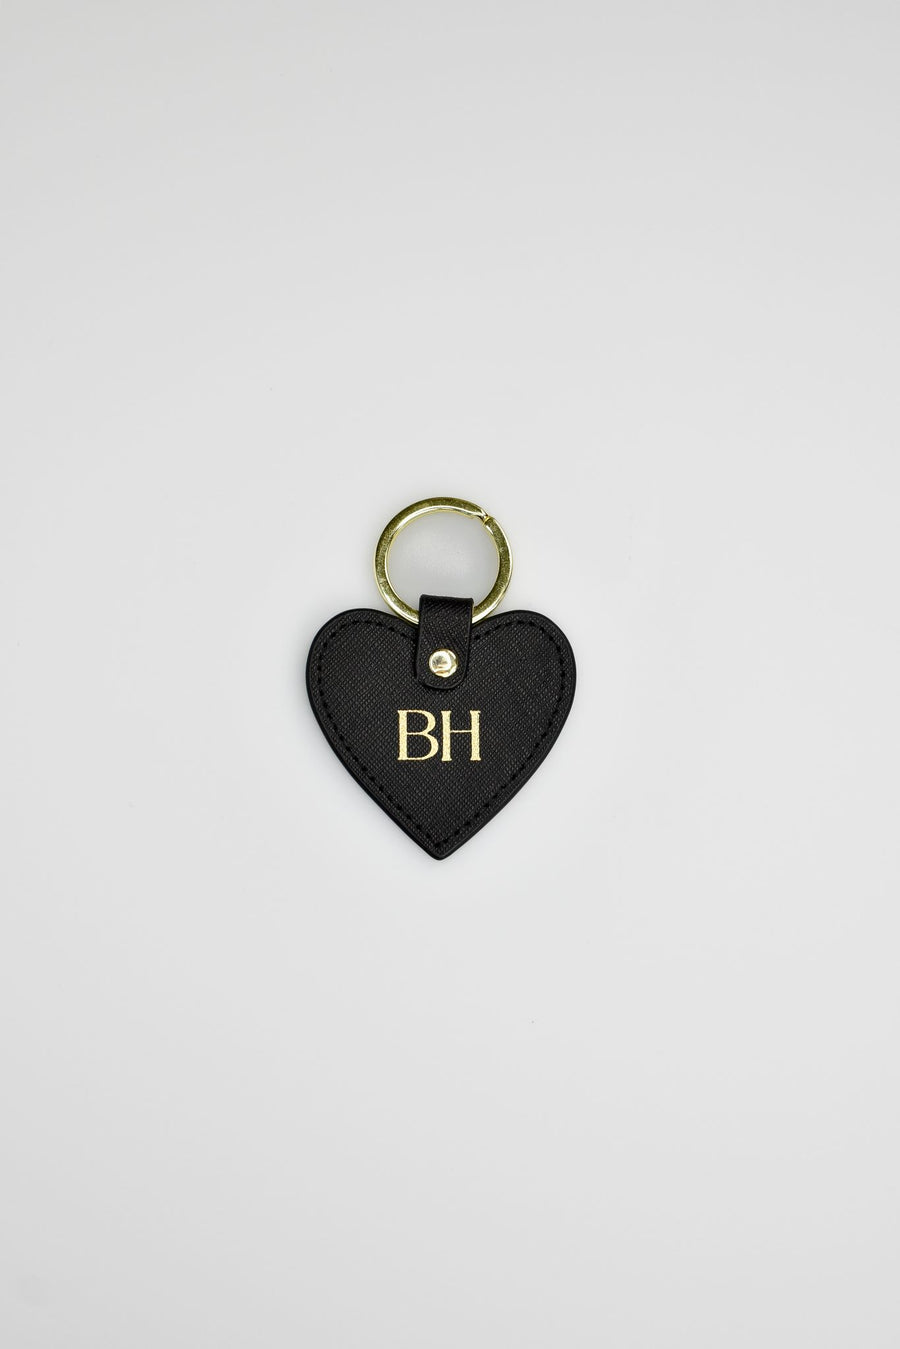 Personalised Leather Heart Keyring - Black with Gold Hardware